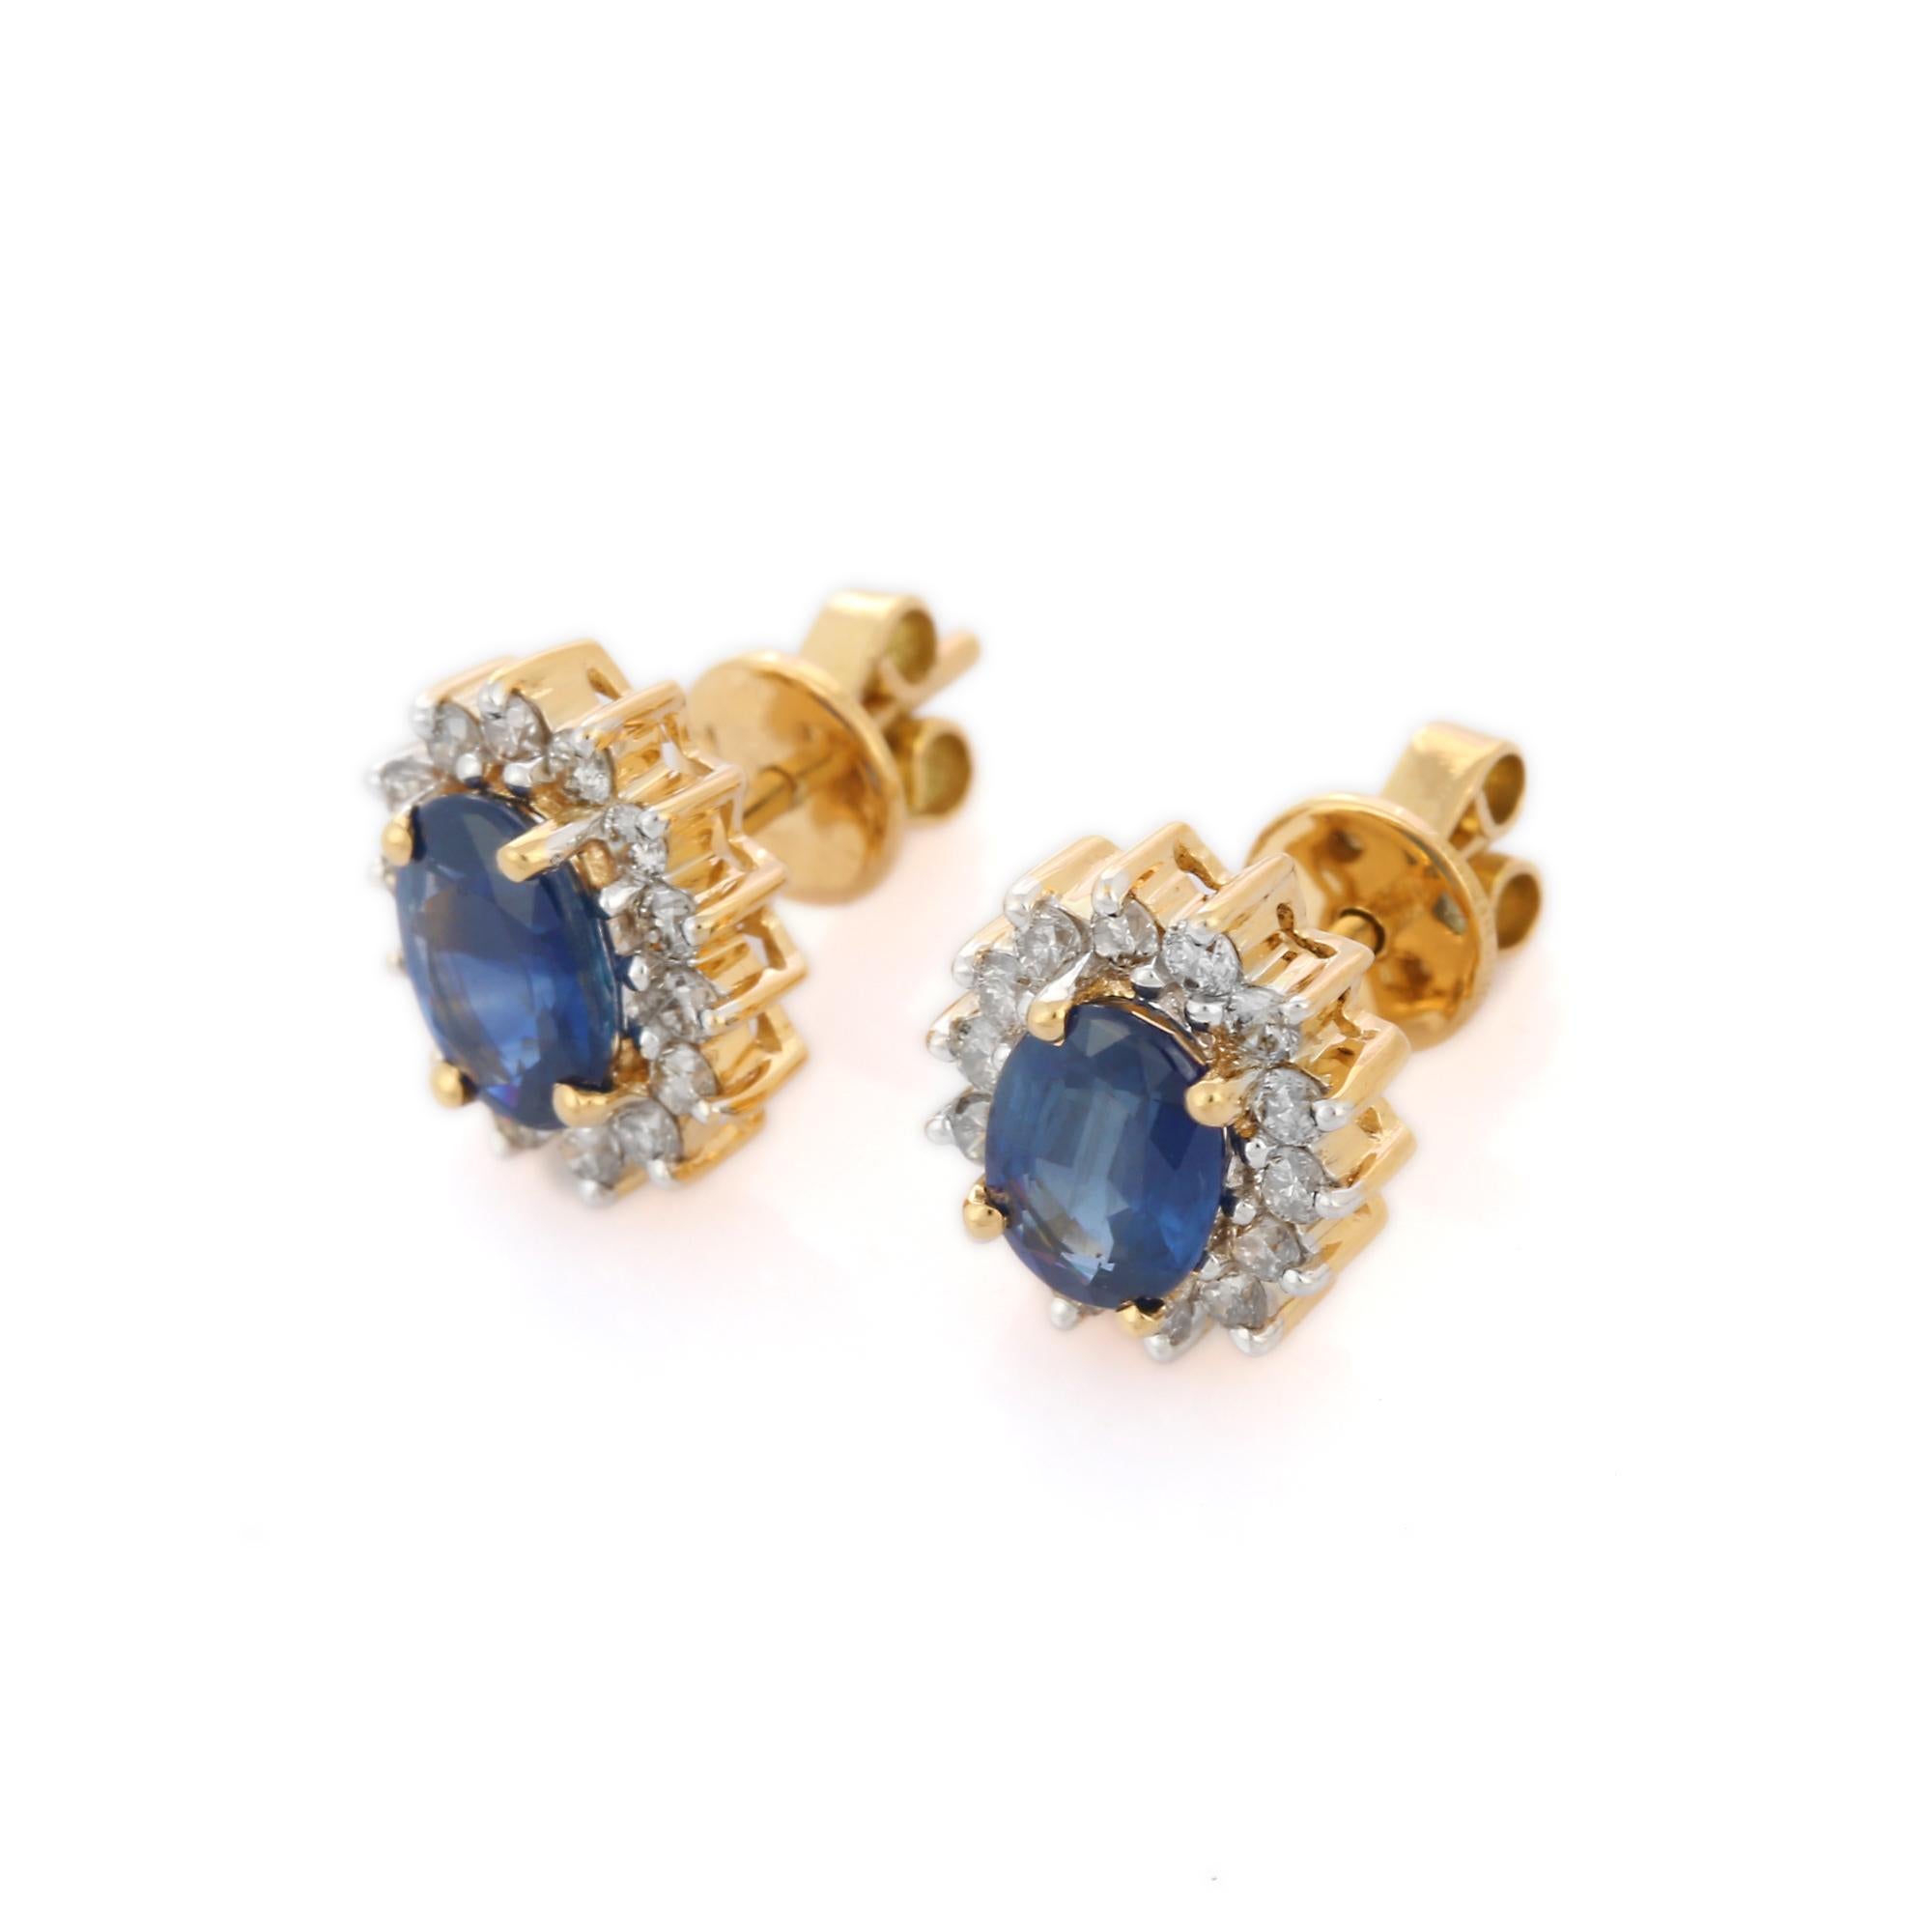 Studs create a subtle beauty while showcasing the colors of the natural precious gemstones and illuminating diamonds making a statement.

Oval cut blue sapphire studs in 18K gold. Embrace your look with these stunning pair of earrings suitable for